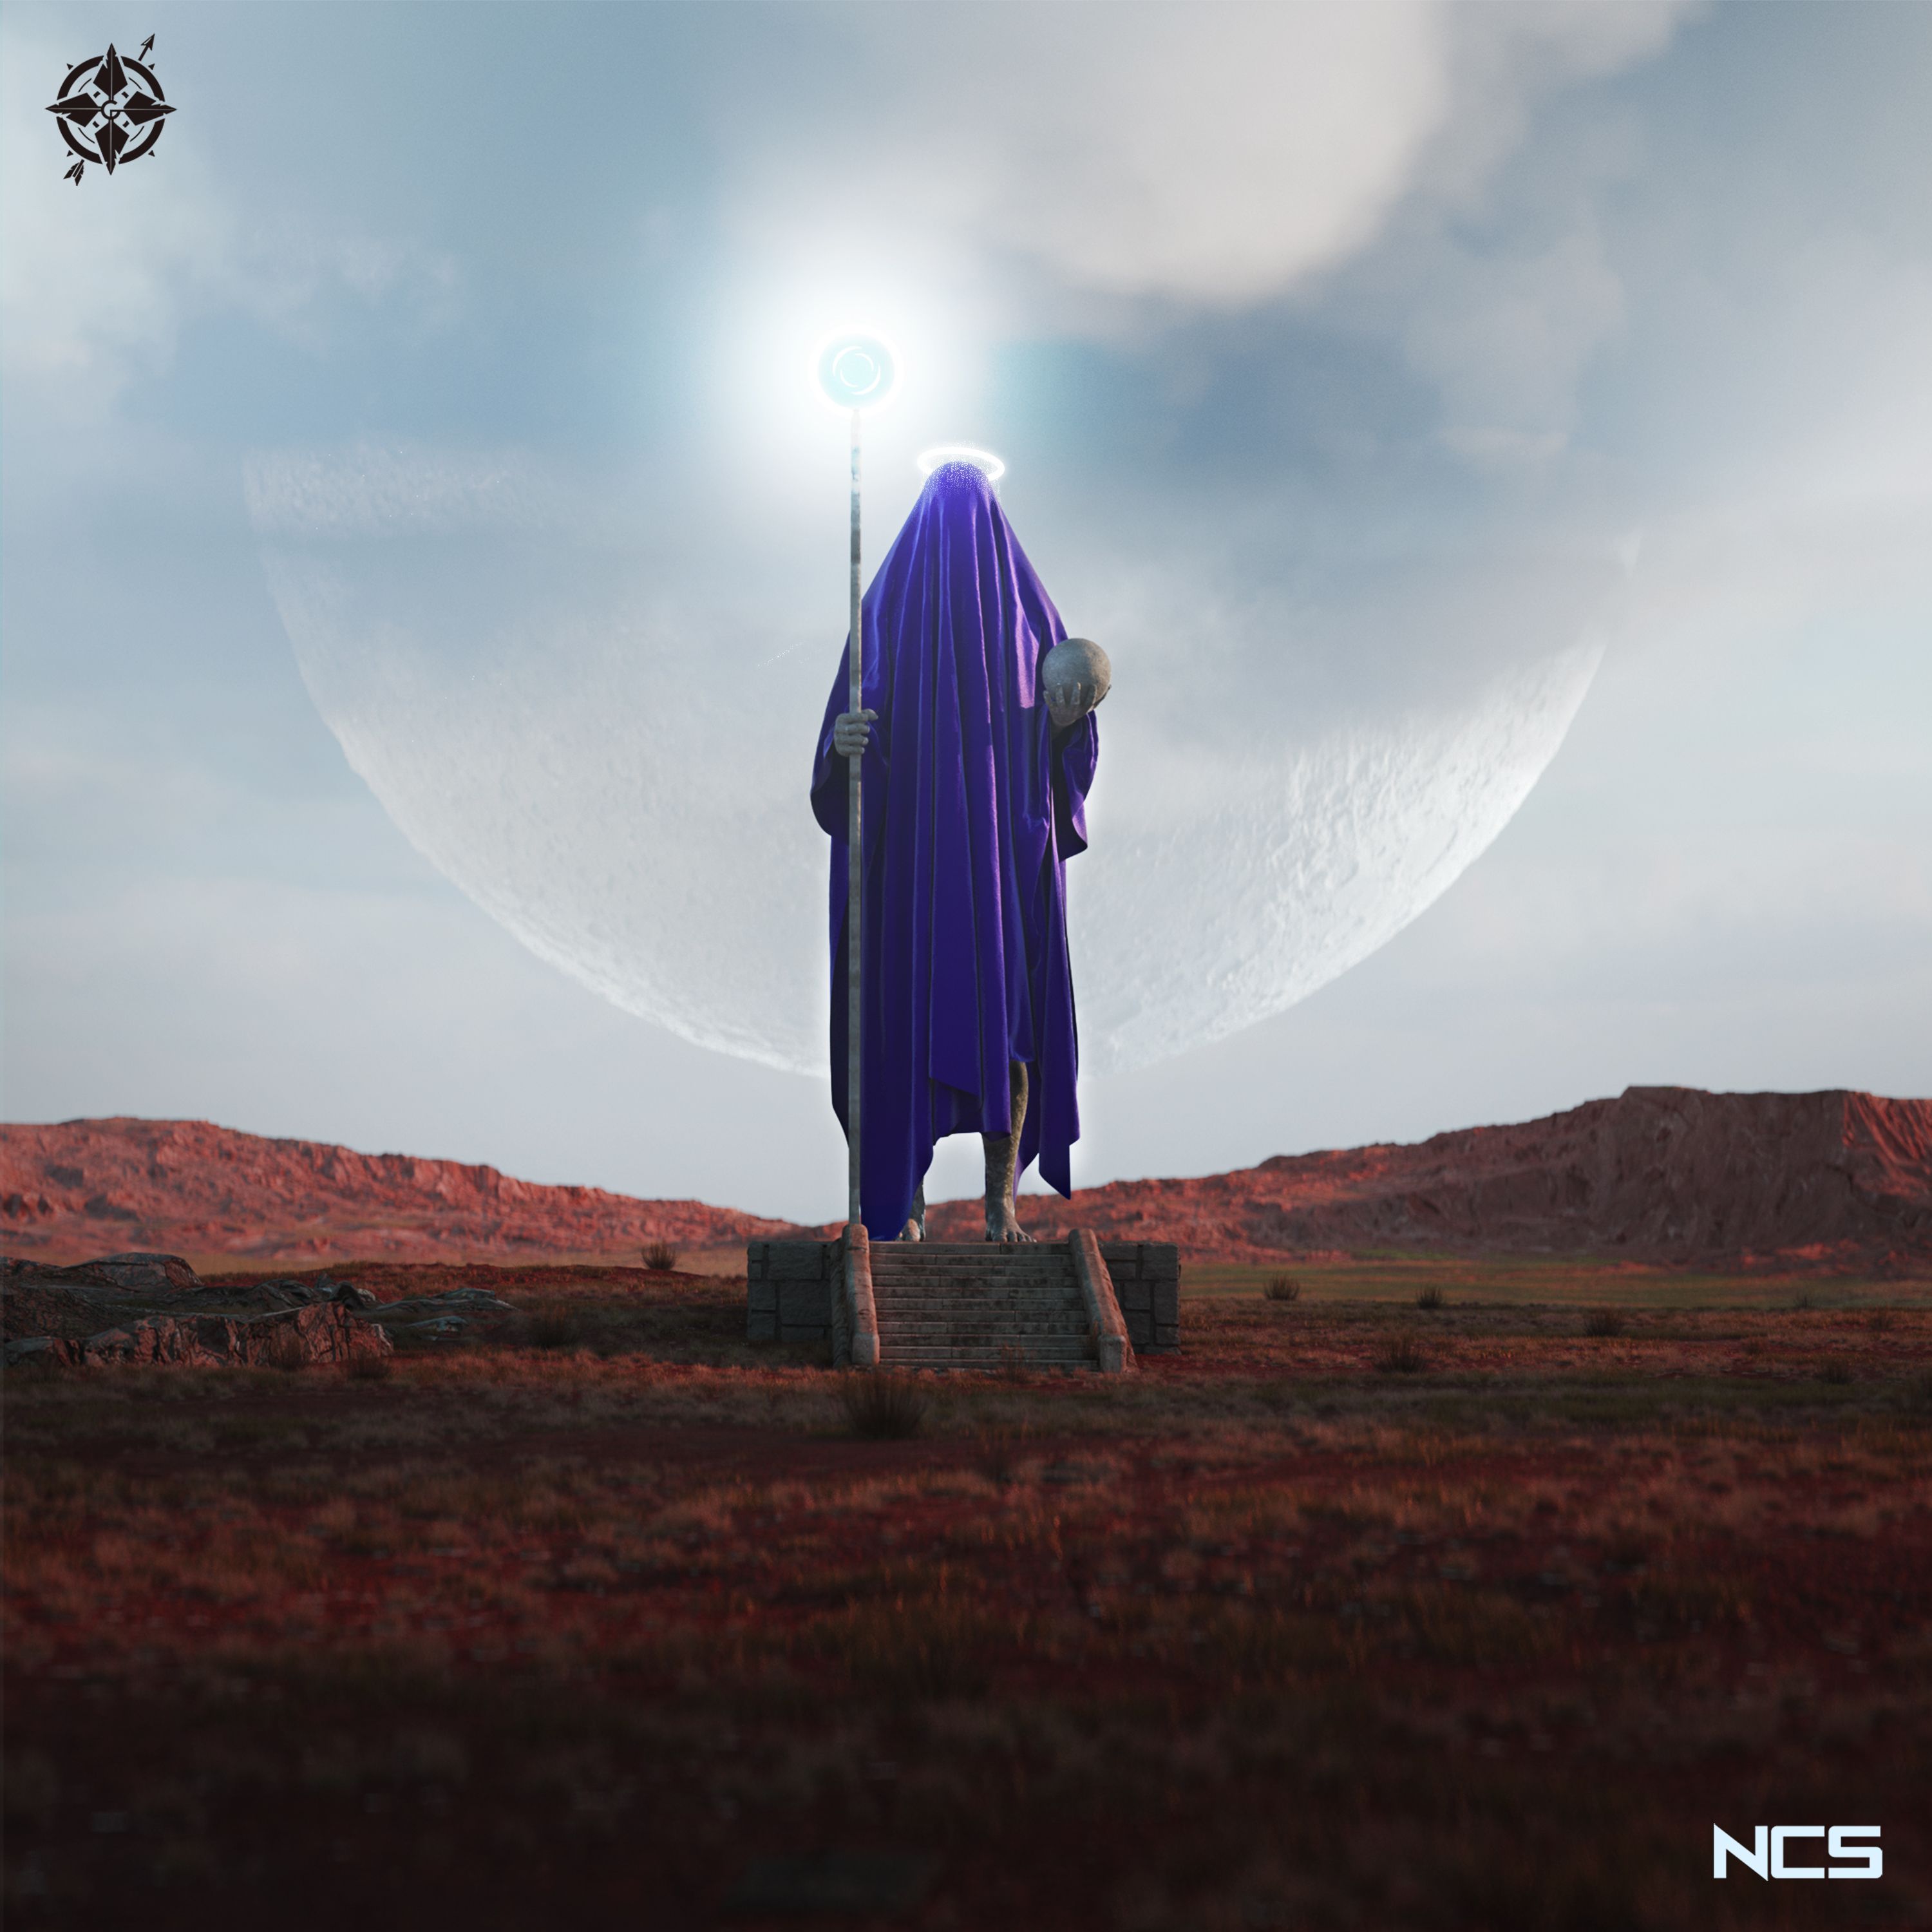 Egzod, Maestro Chives, Neoni - Royalty (Wiguez & Alltair Remix) [NCS Release]